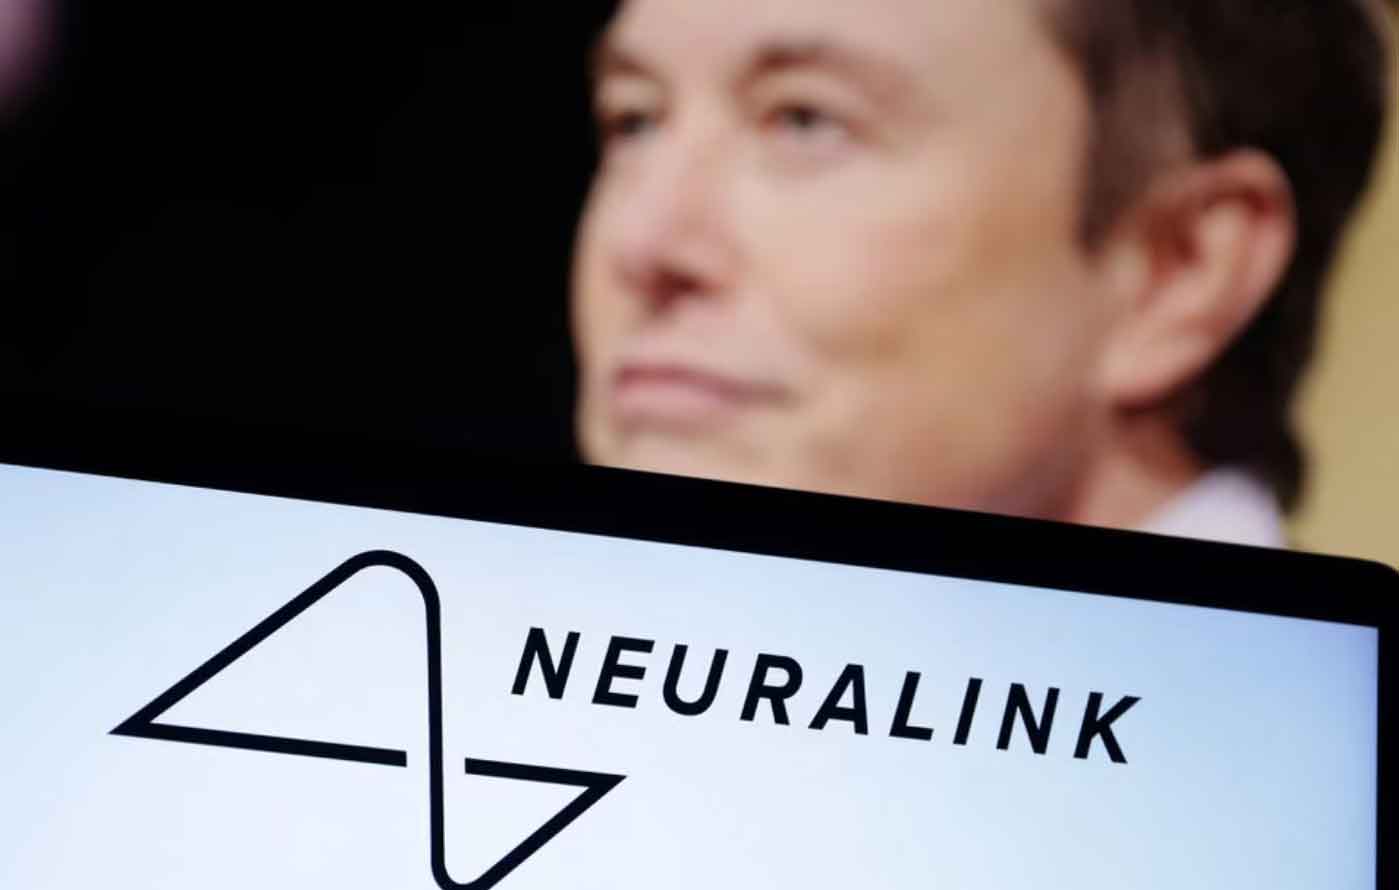 Elon Musk's Neuralink raises $280 mln in funding led by Thiel's Founders Fund